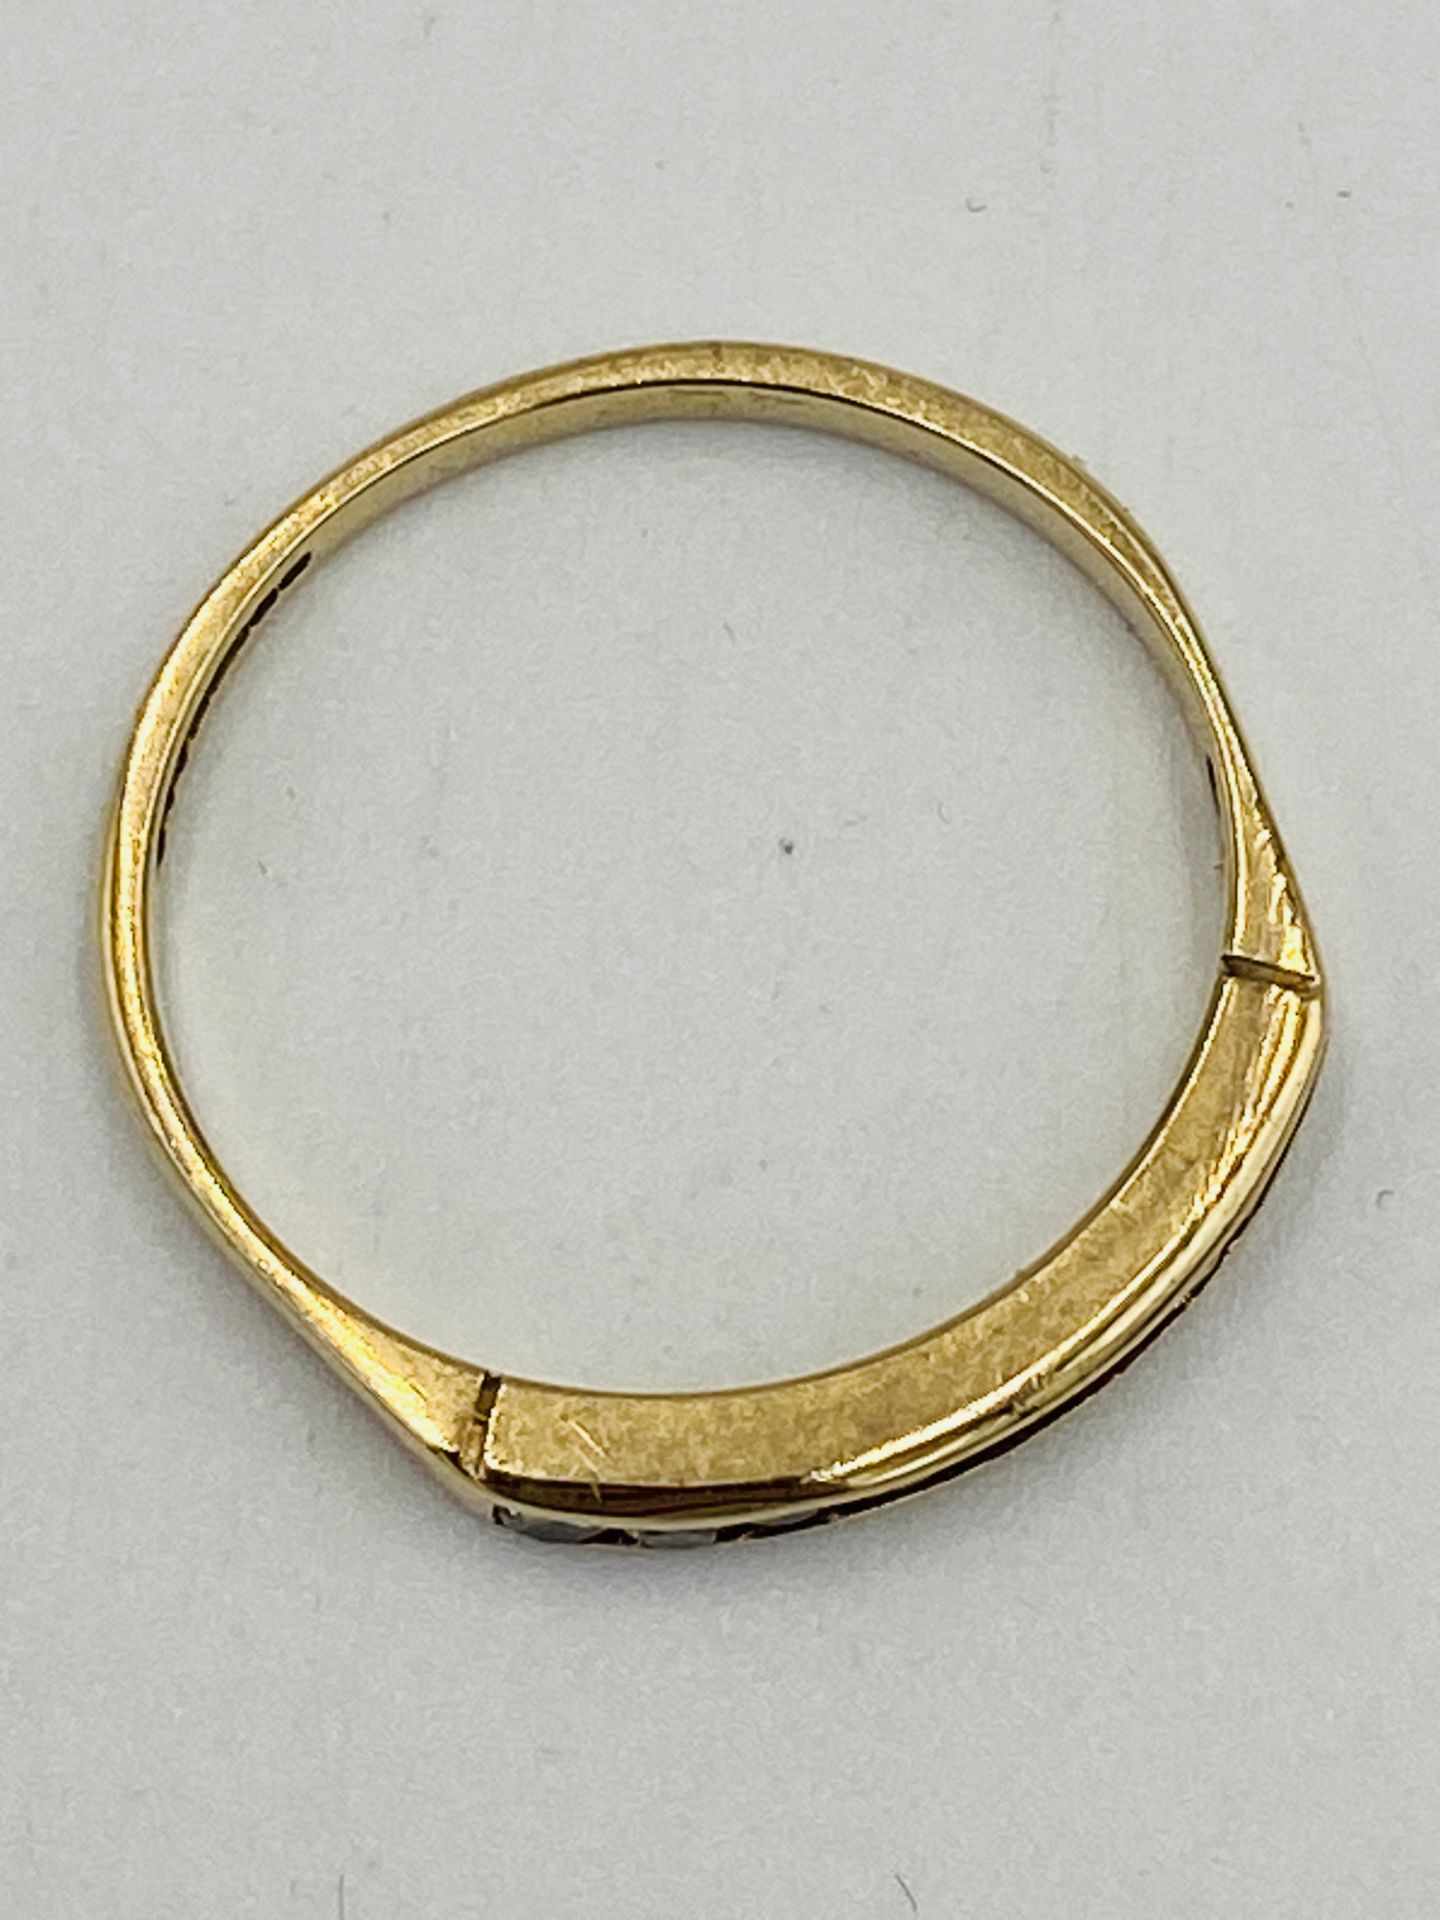 9ct gold and diamond ring - Image 2 of 3